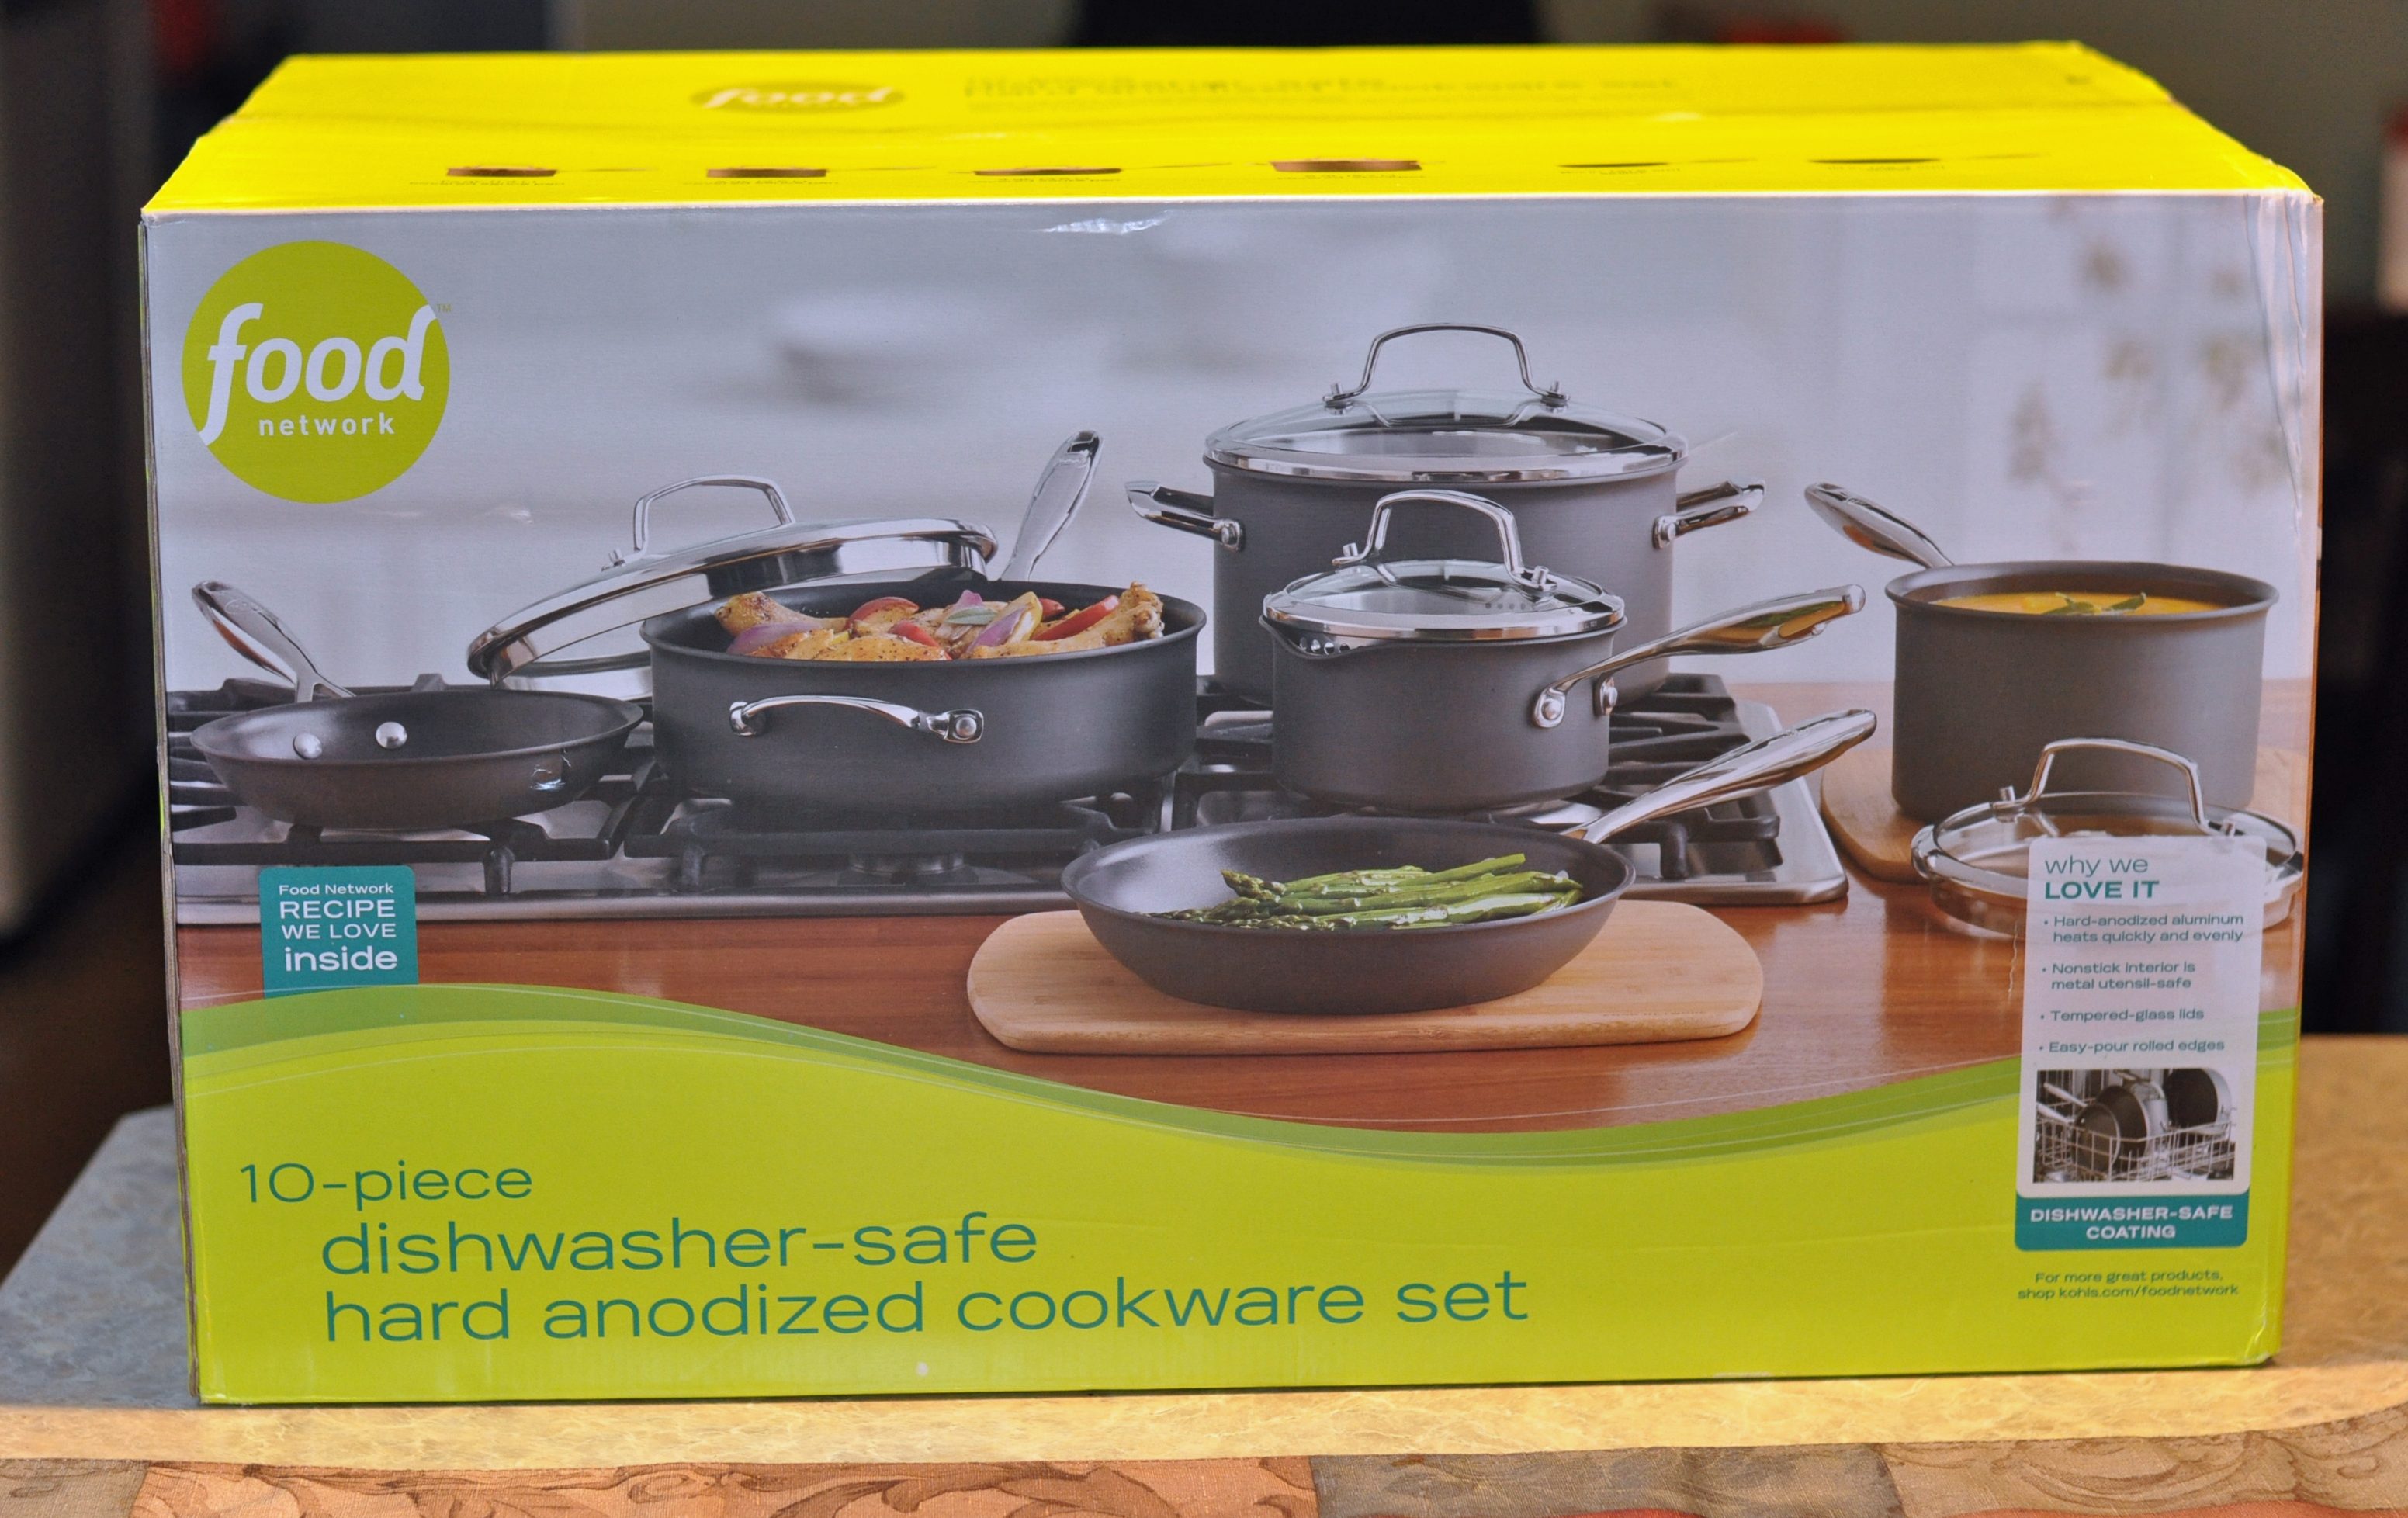 Food Network 10-pc Nonstick Ceramic Cookware Set Review